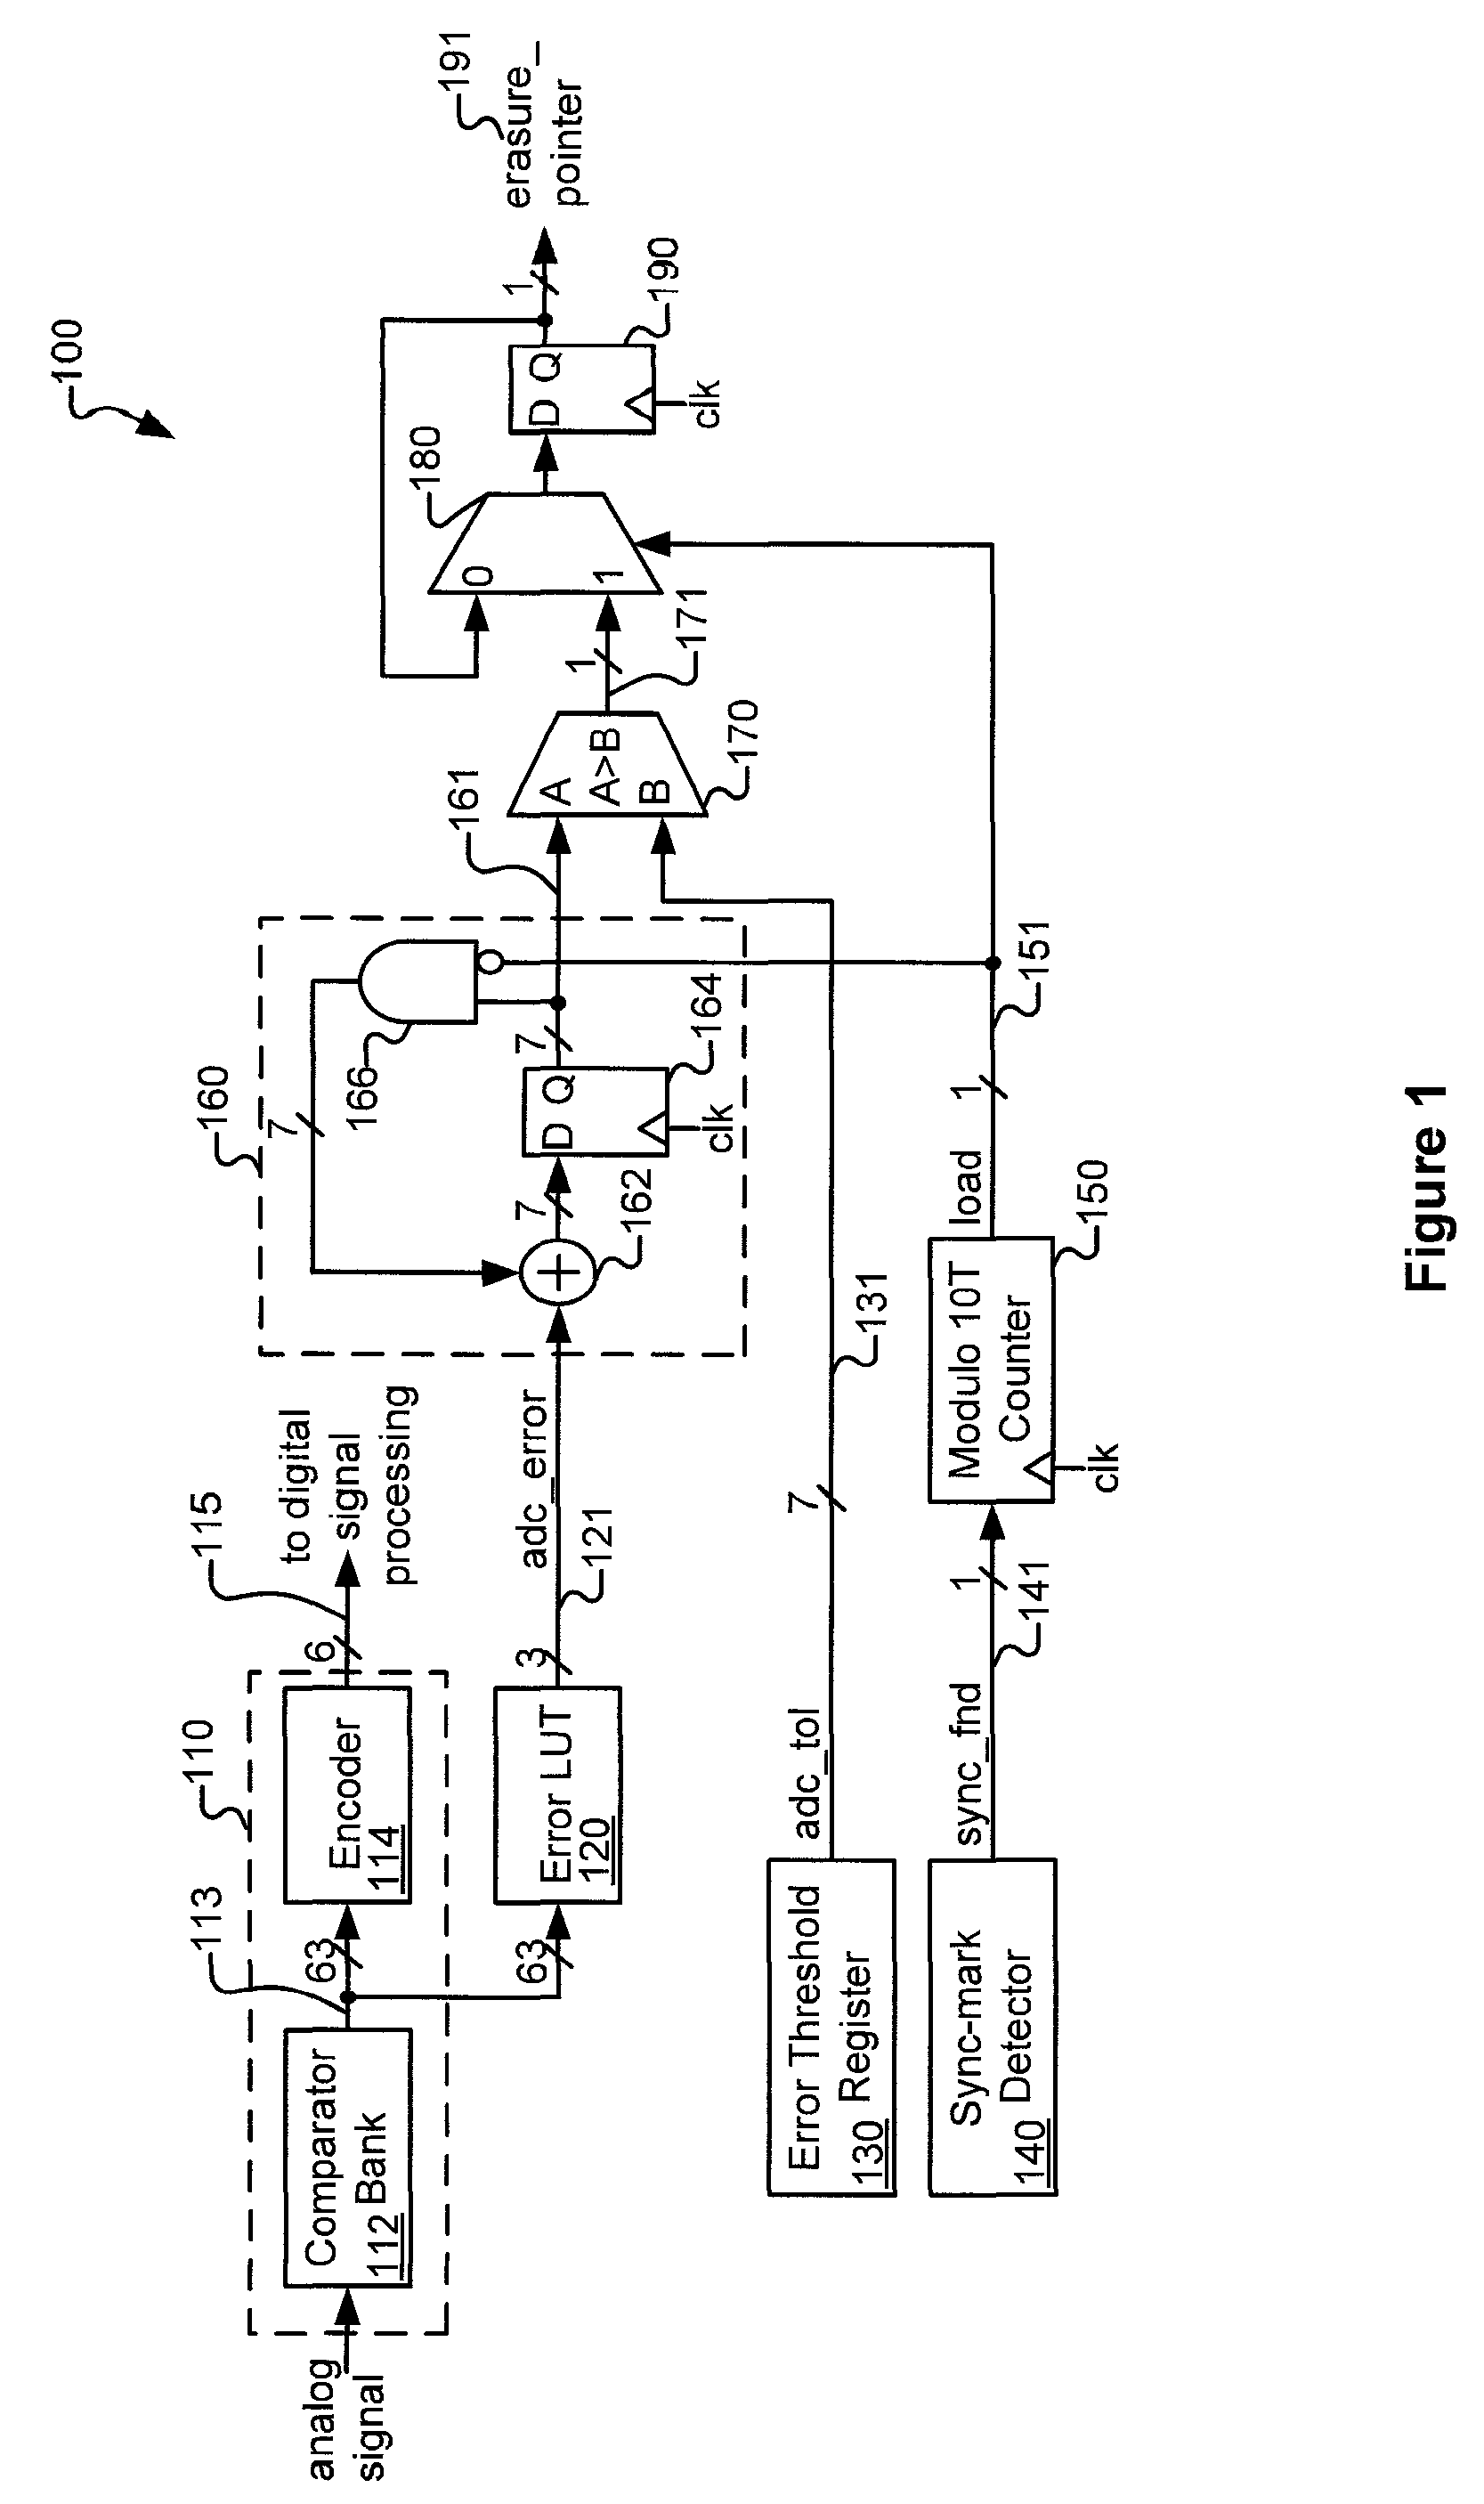 Systems and methods for generating erasure flags